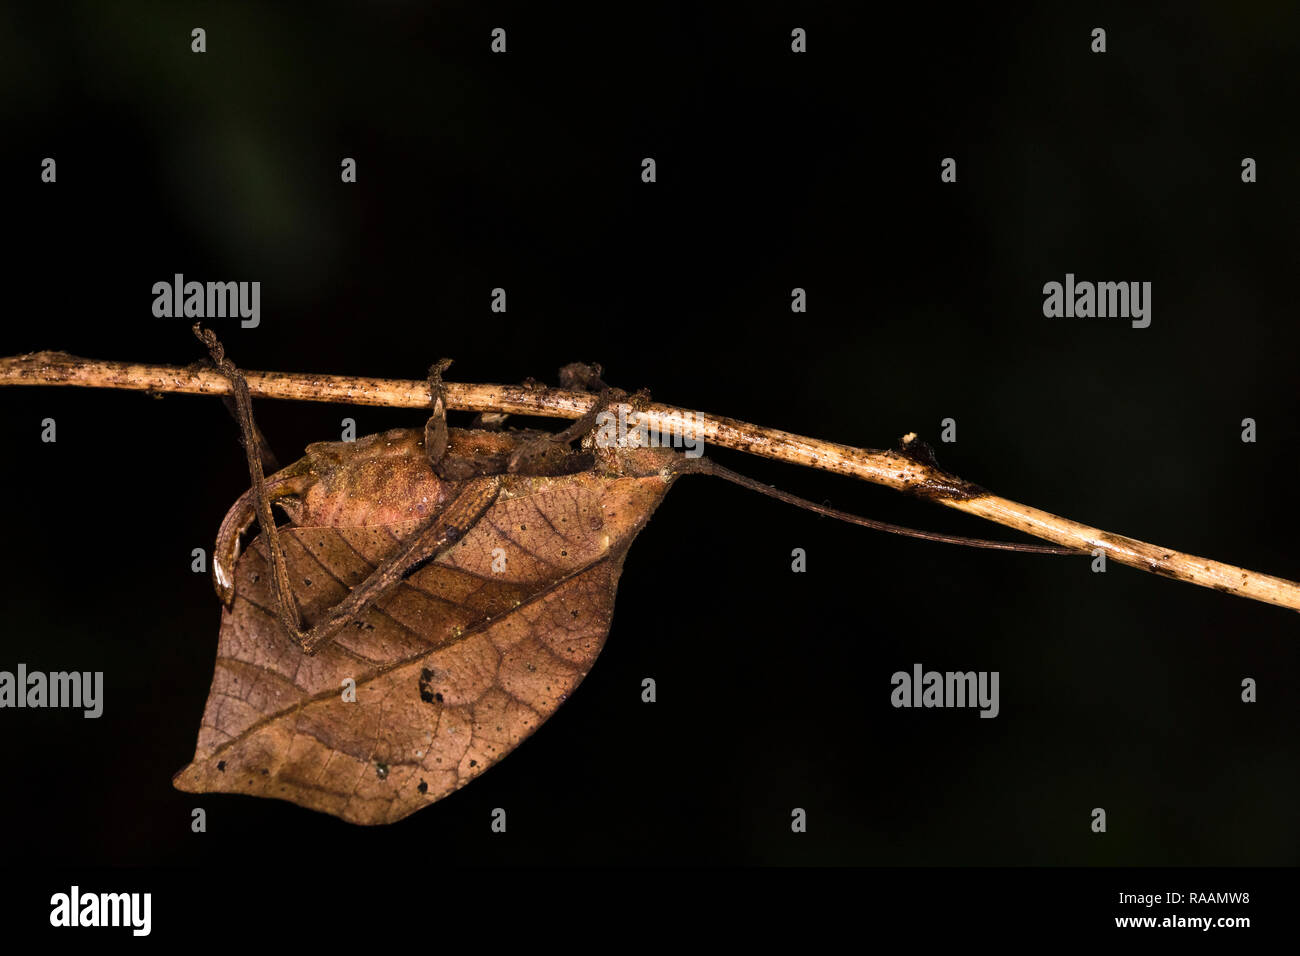 Katydid leaf-mimic insect in Costa Rica Stock Photo